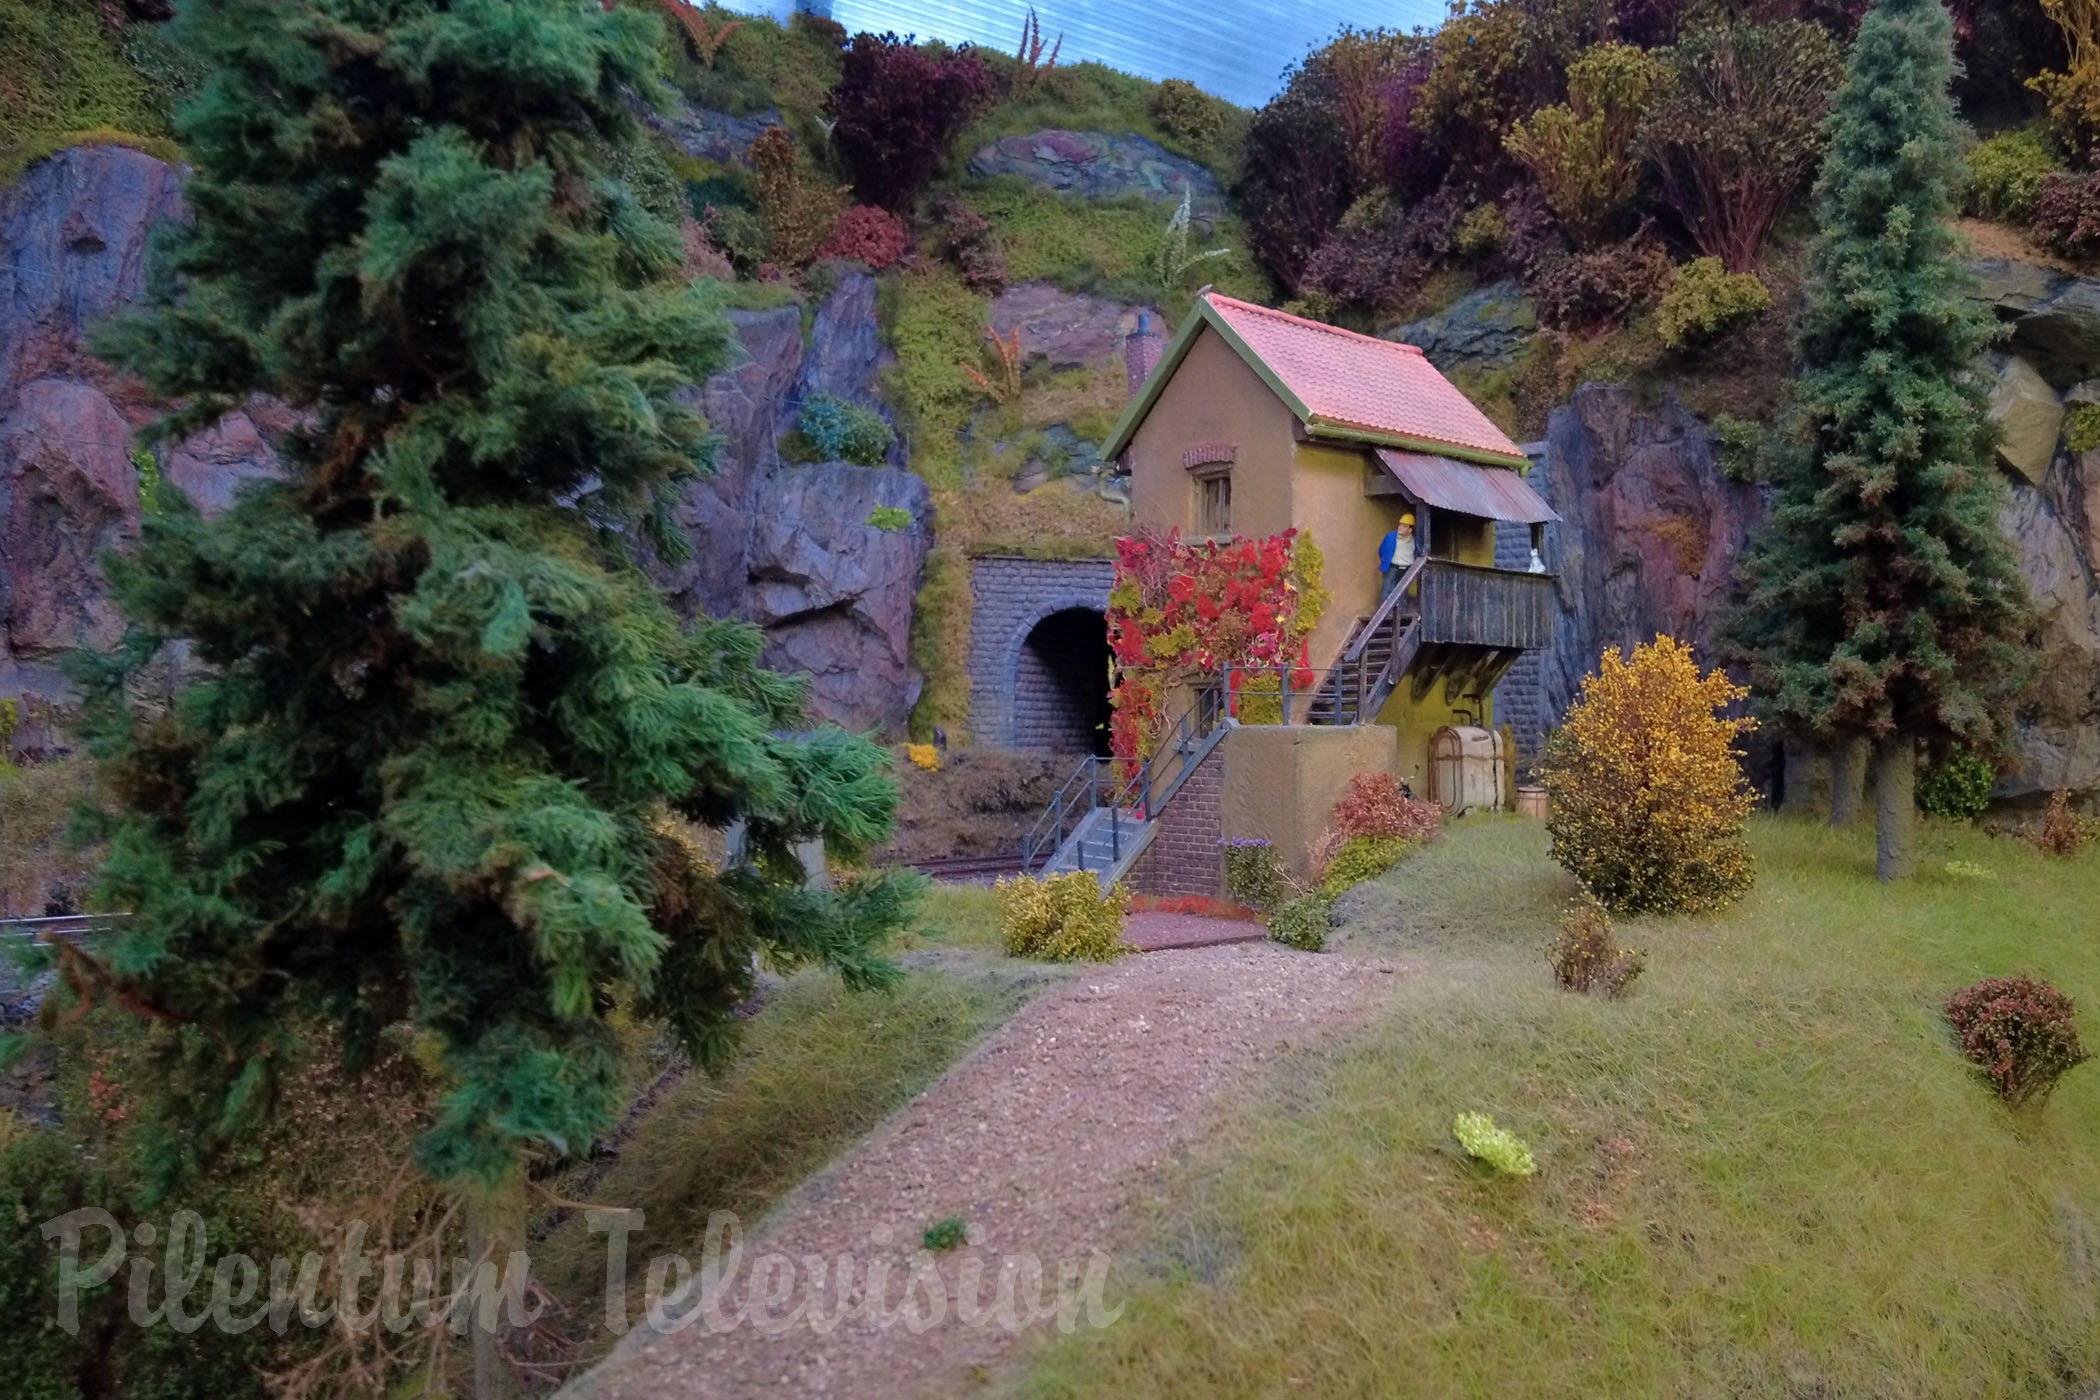 The brand new model railroad layout in gauge 1 (1/32 scale trains) by Leuvense Spooreen Vrienden